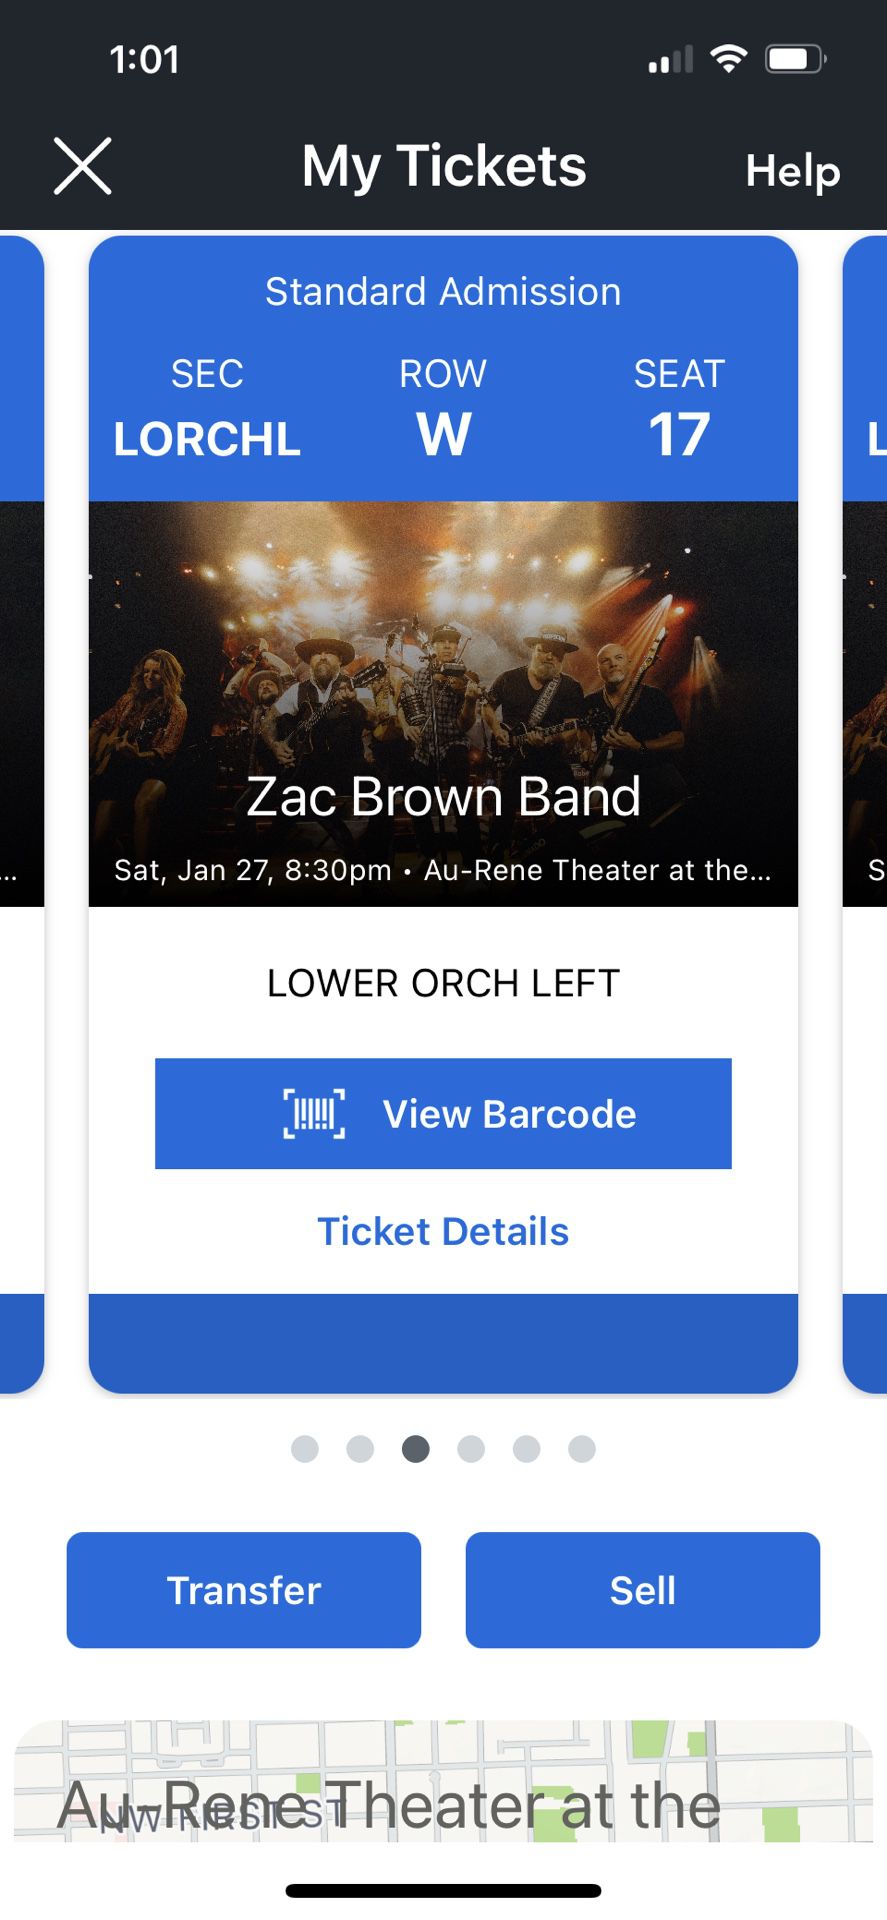 Zac Brown Band 4 Tickets In Lower Orch - 4 Seats Together $1650 And Electronic Transfer For Easy Delivery. Jan 27th Show 8.30pm Ft Laud